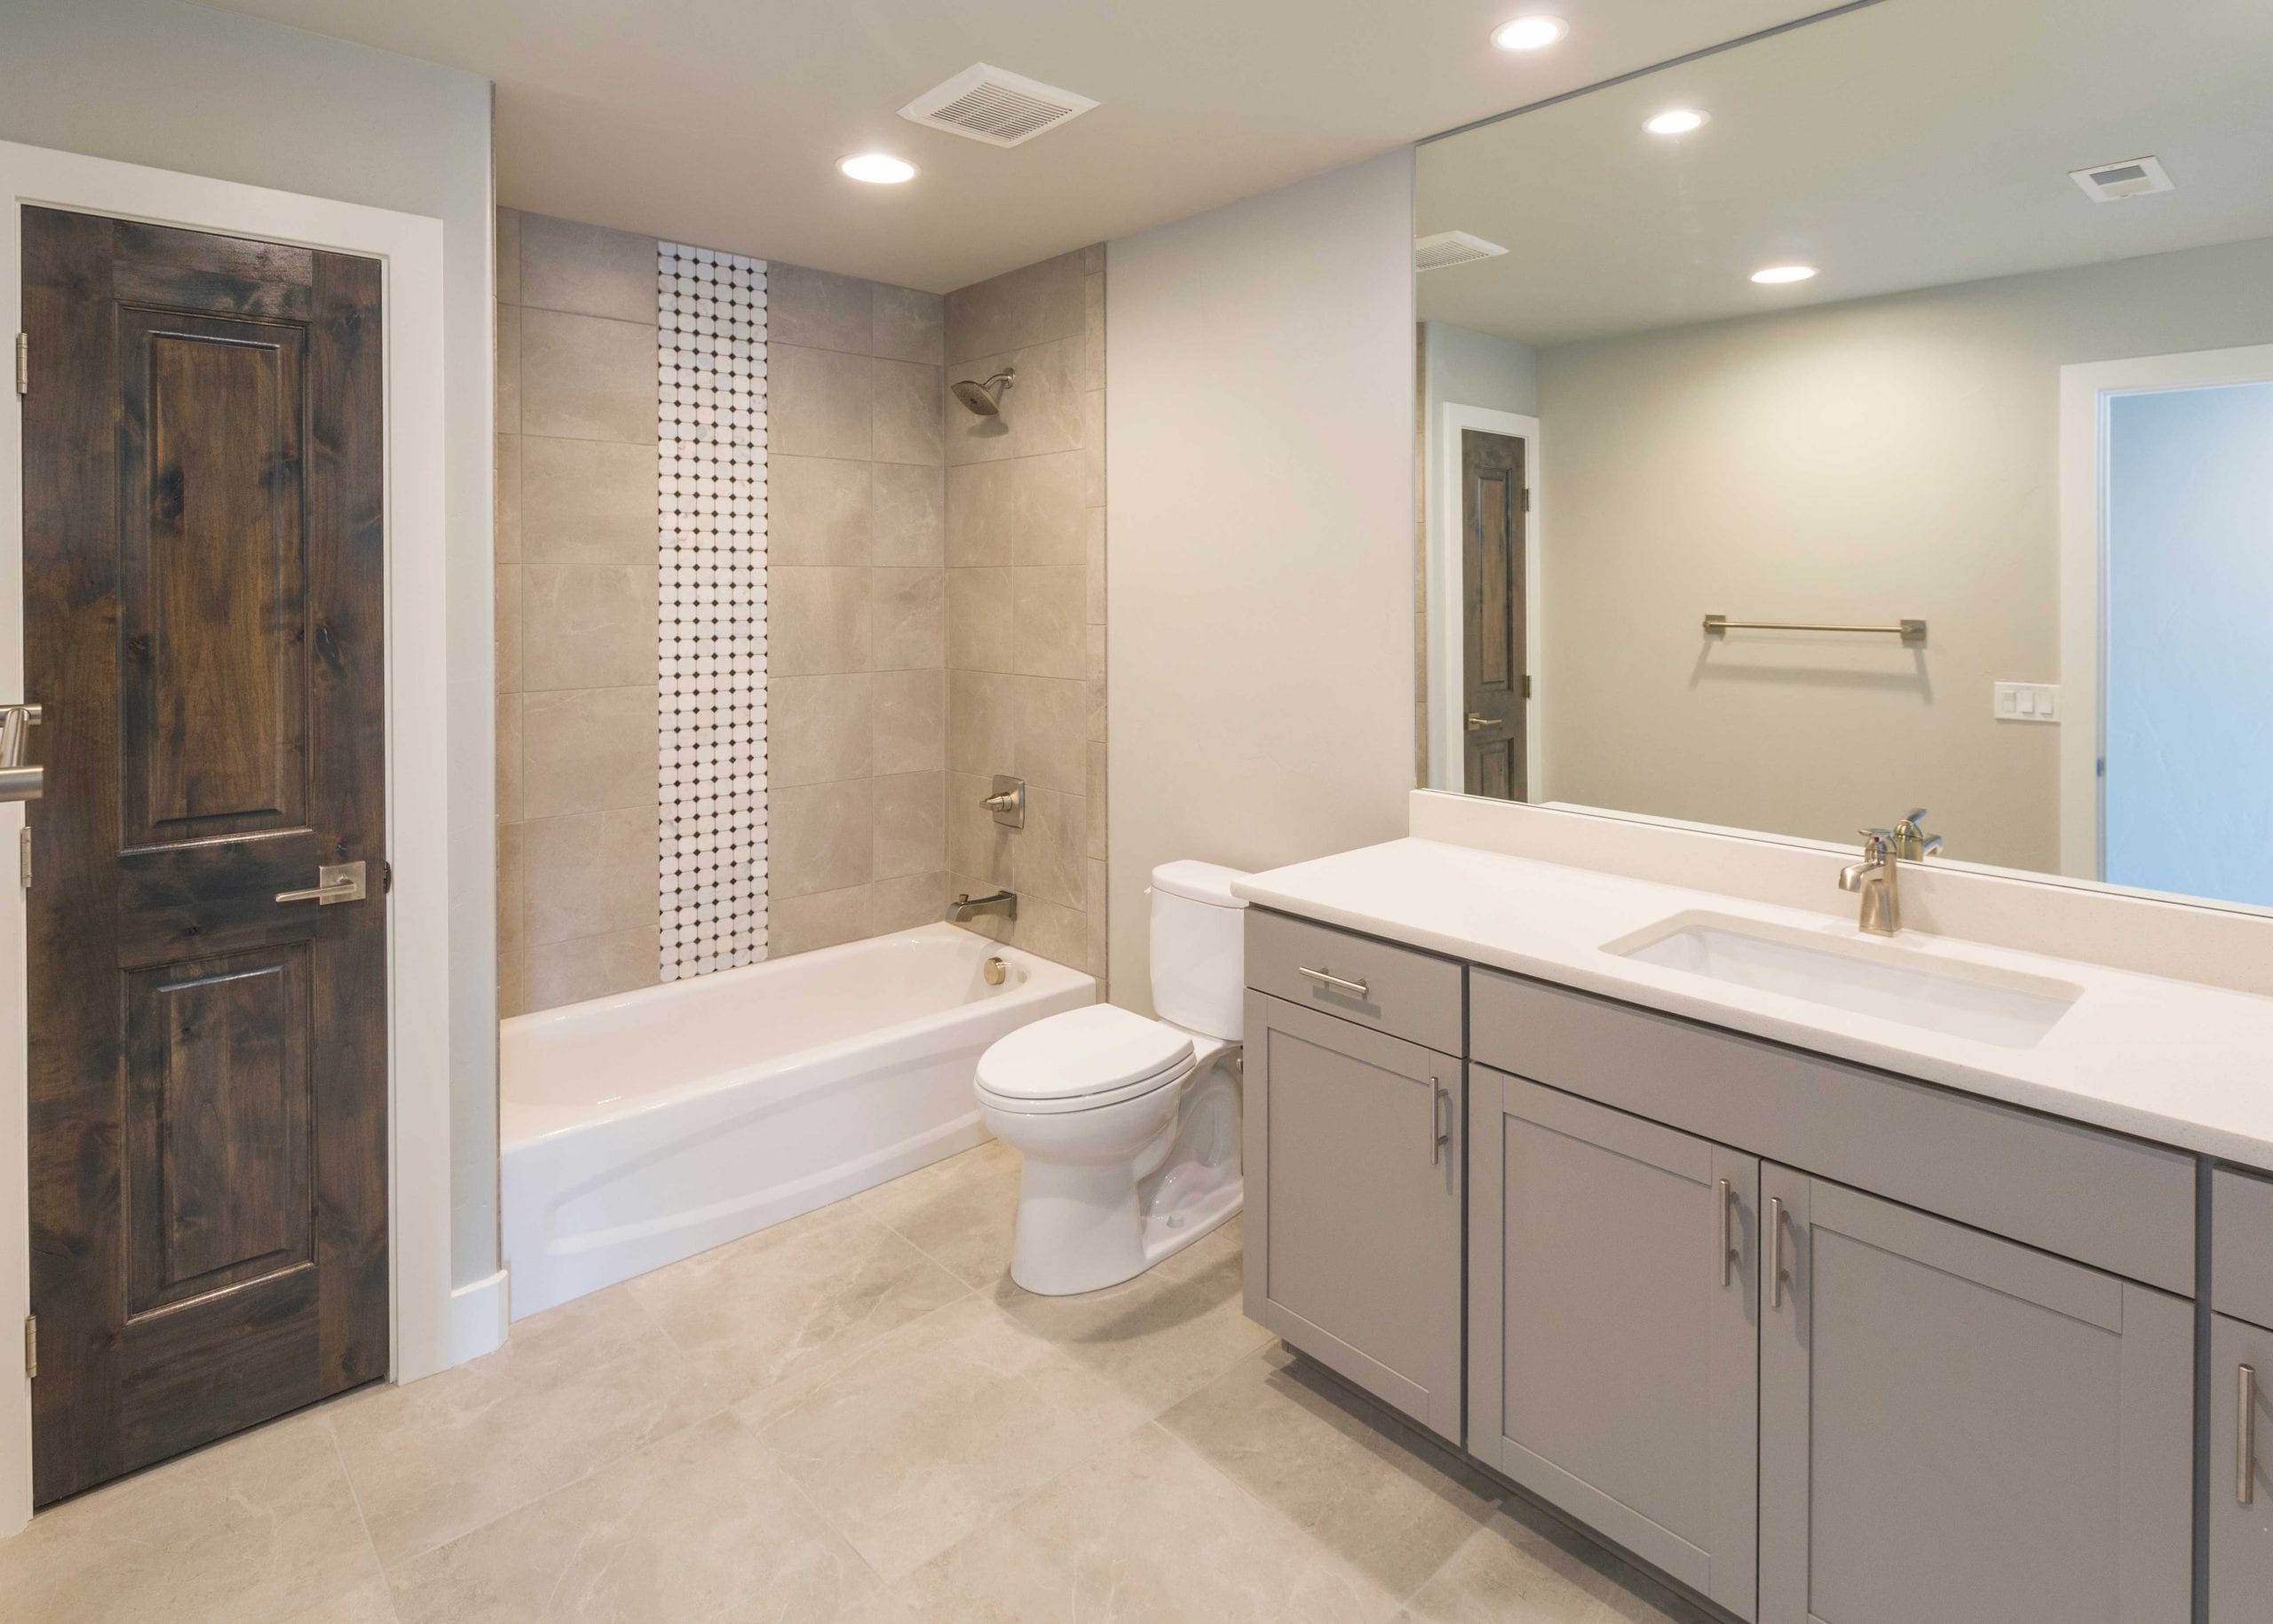 Shower and Bathtub Installation Services in Antioch, CA.